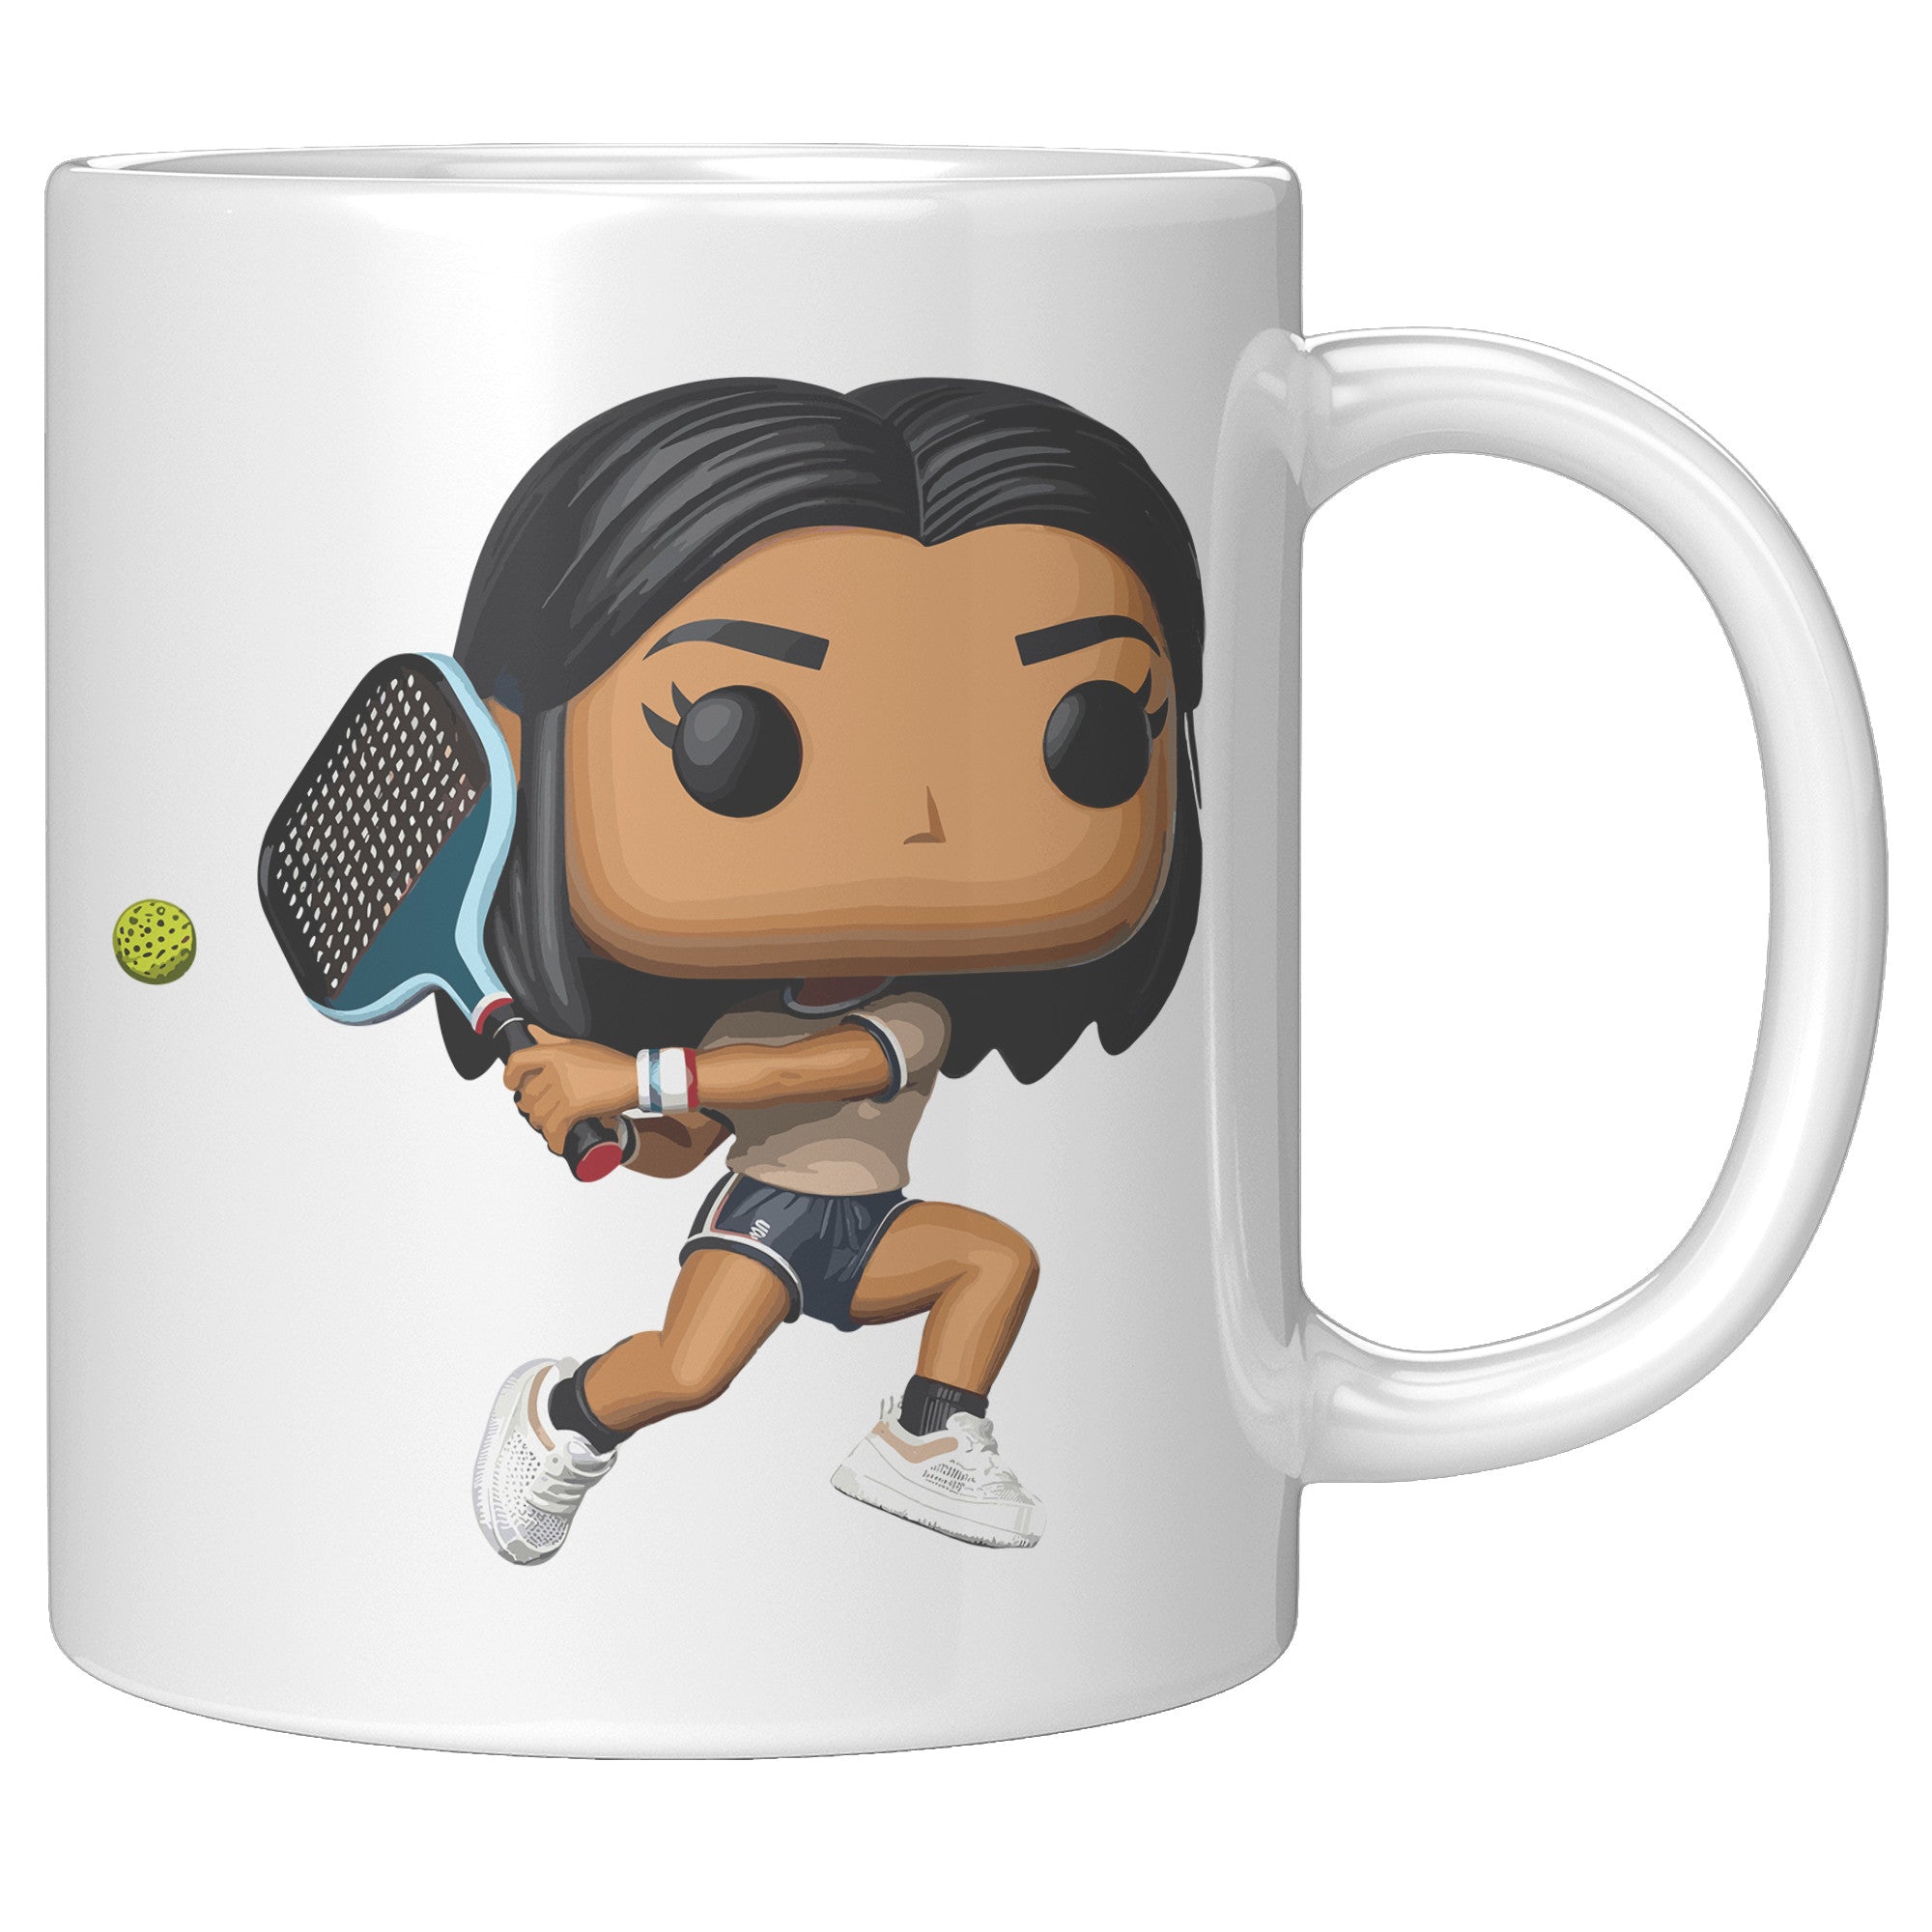 "Funko Pop Style Pickle Ball Player Girl Coffee Mug - Cute Athletic Cup - Perfect Gift for Pickle Ball Enthusiasts - Sporty Chic Apparel" - E